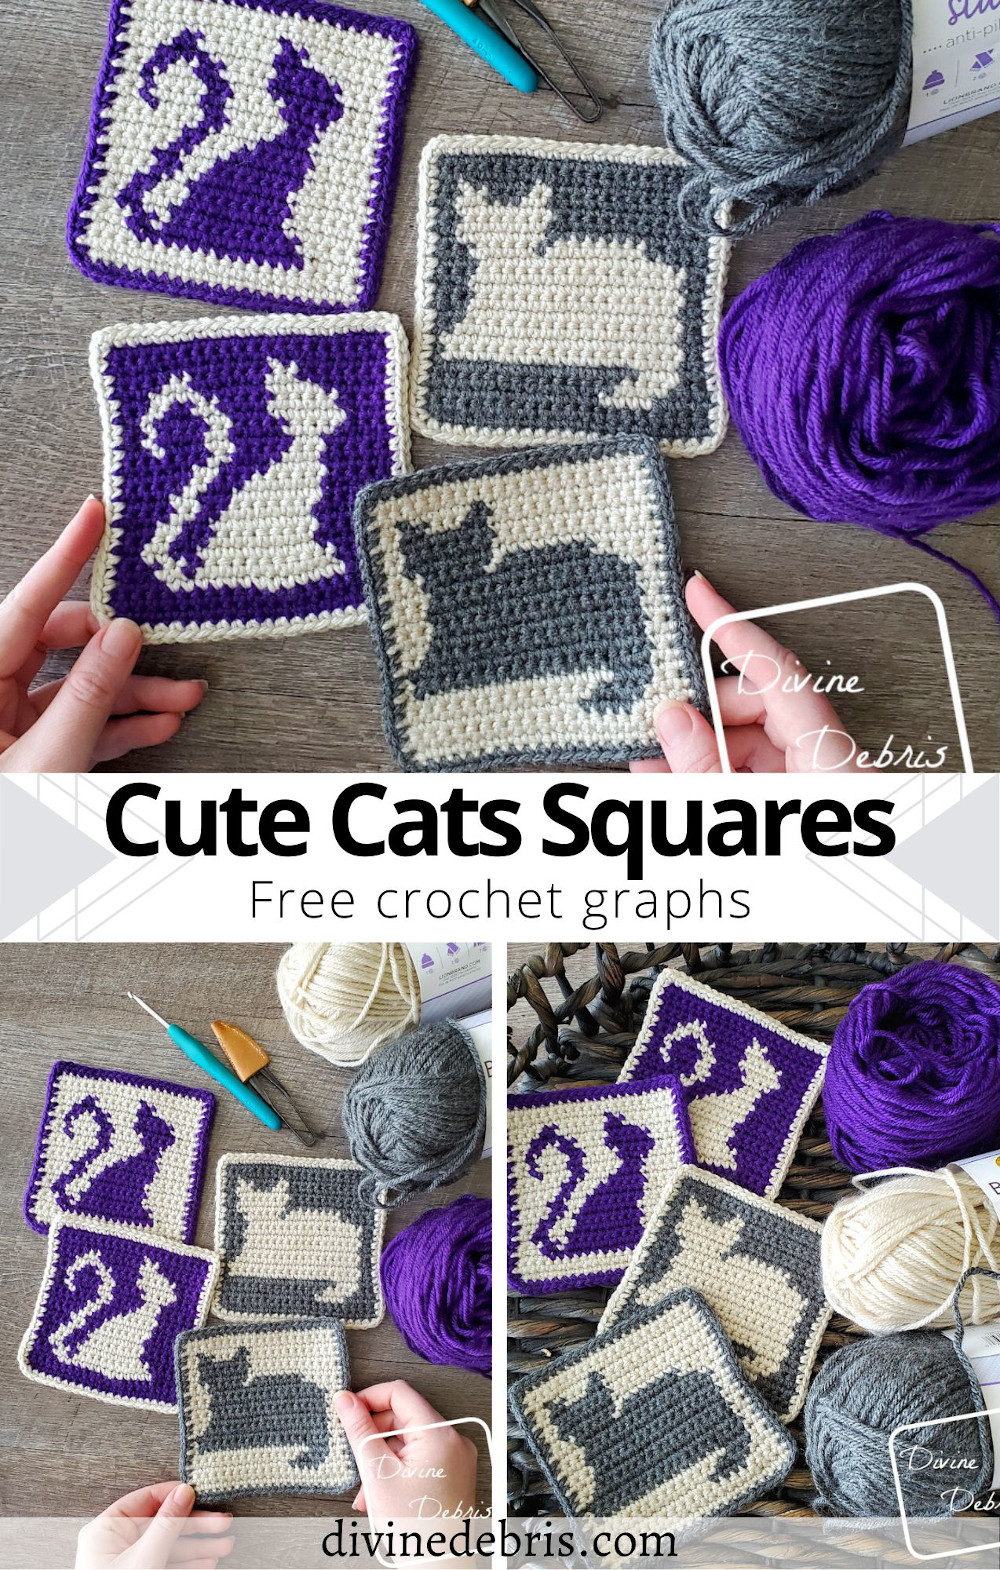 Learn to make Cute Cats Squares crochet coasters from free graphs by Divine Debris. Great for crochet, knitting, cross stitch, and more.